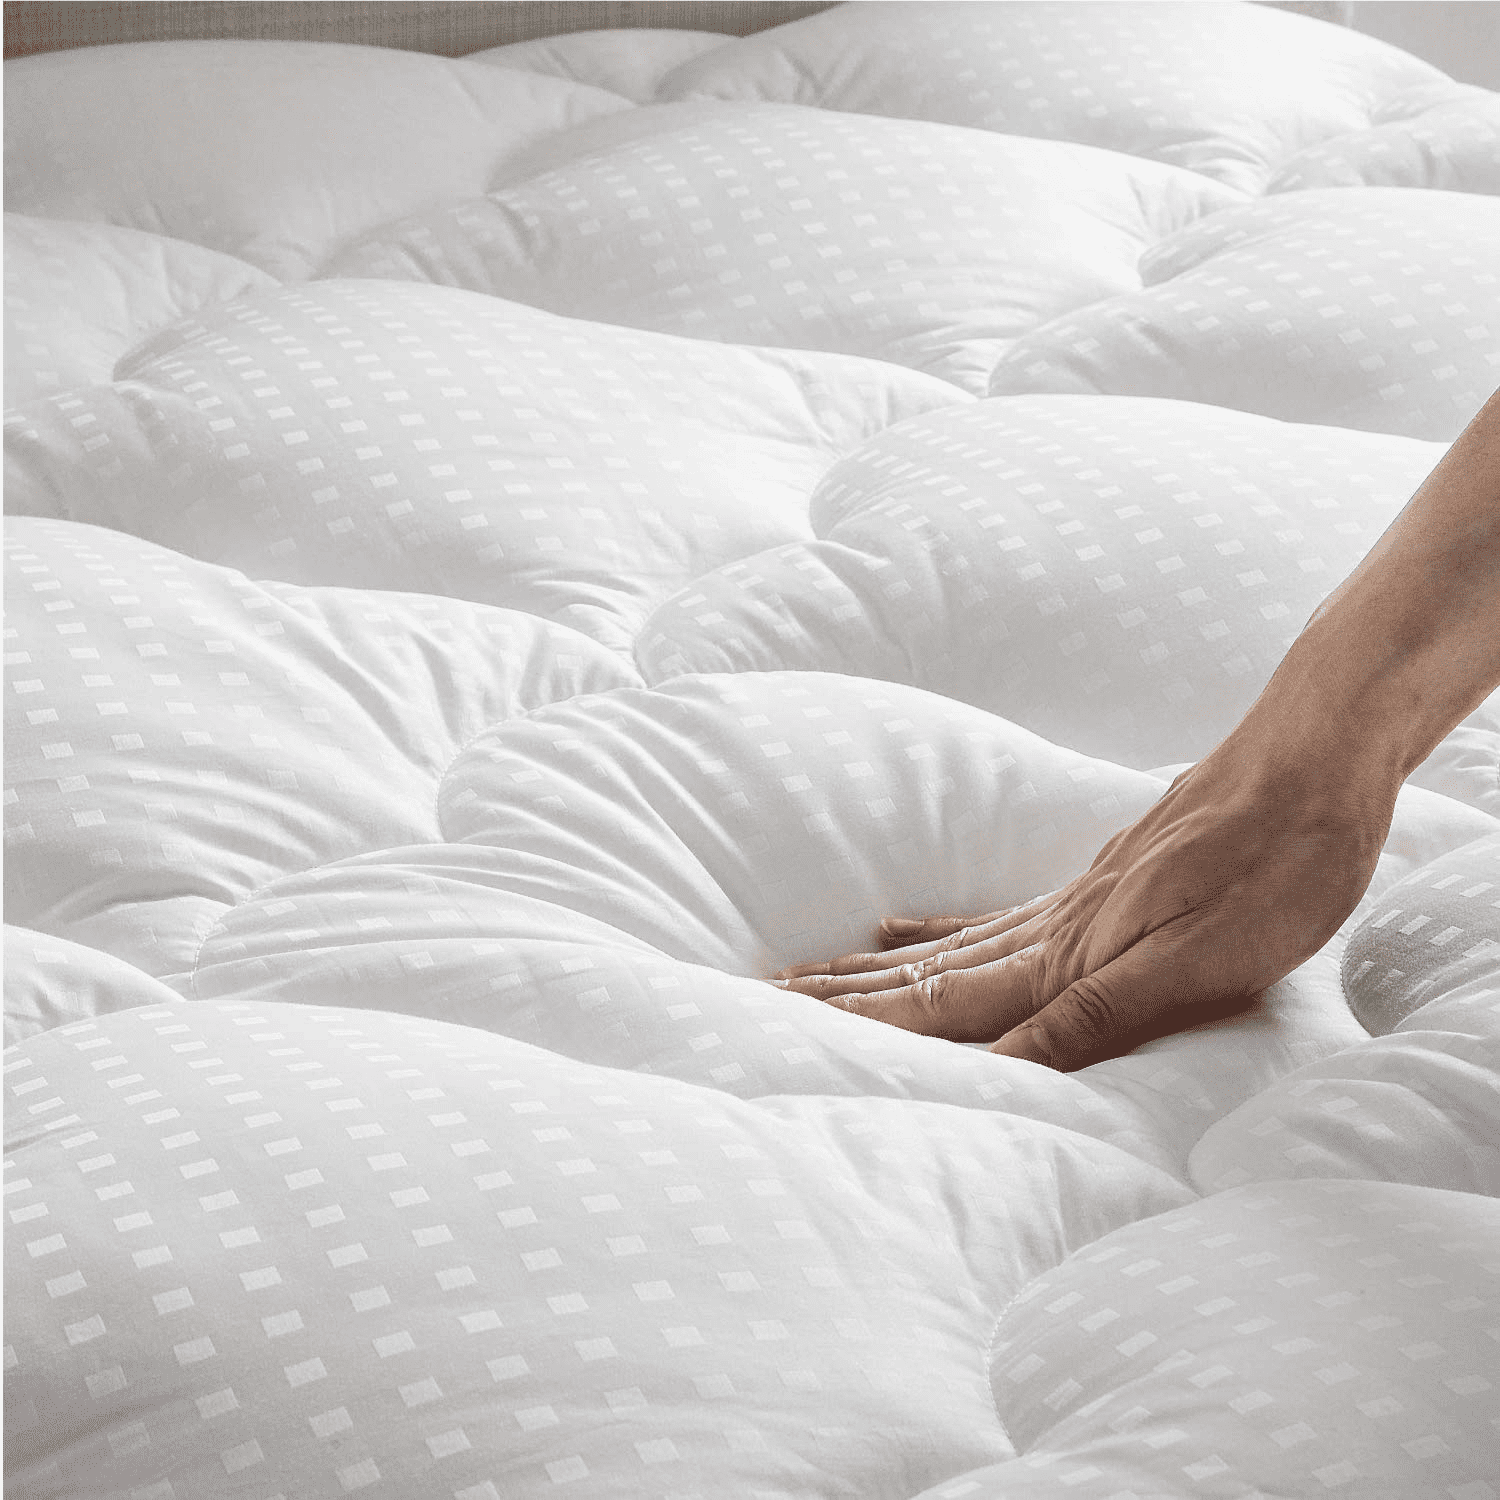 Details about   Cooling Extra Thick Matress Topper Mattress Pad Cover Cotton Pillowtop Deep New 